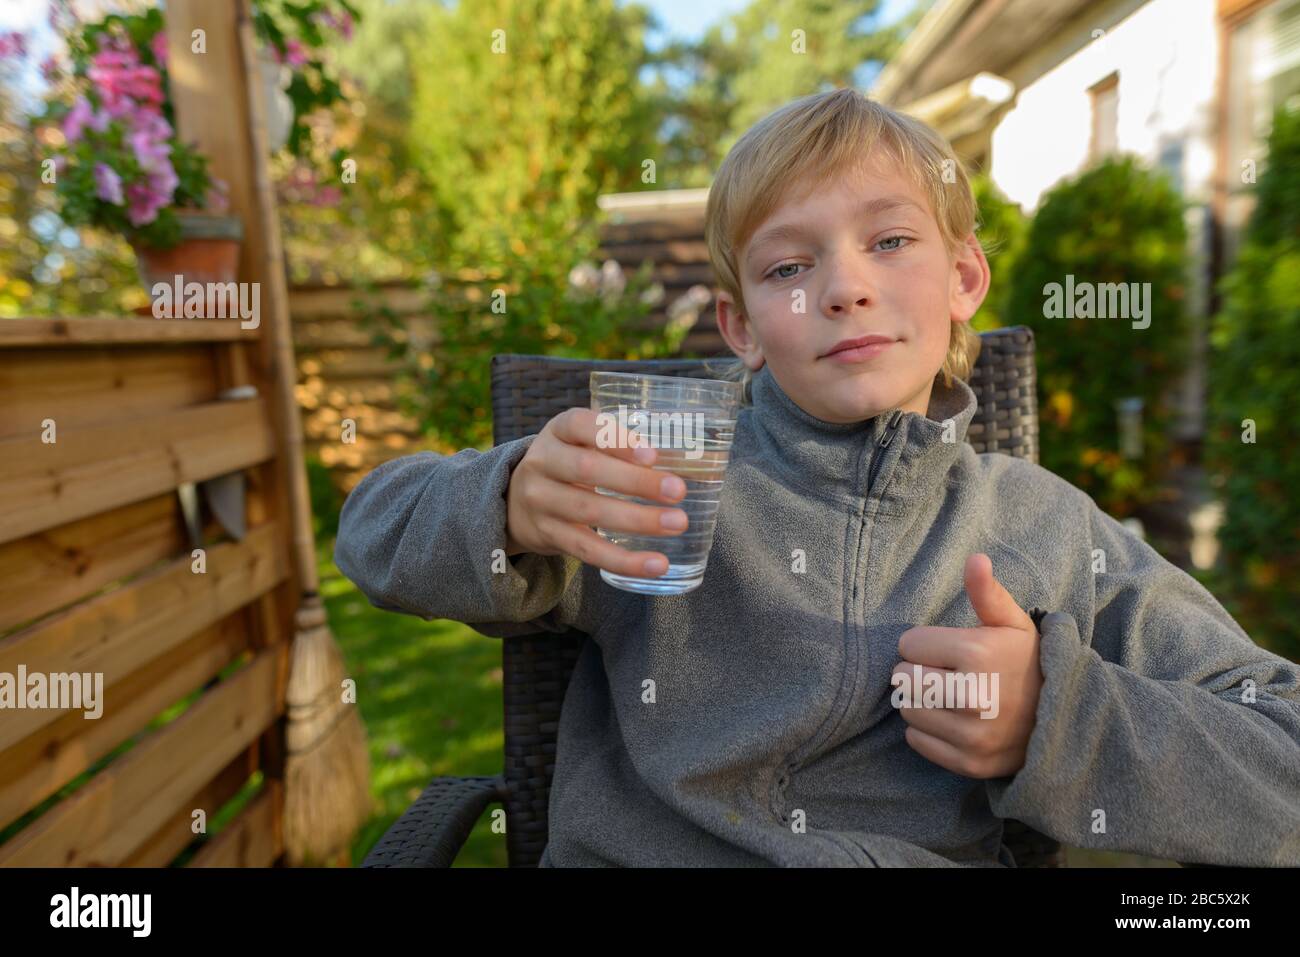 Young handsome boy with glass of water giving thumbs up in the backyard Stock Photo